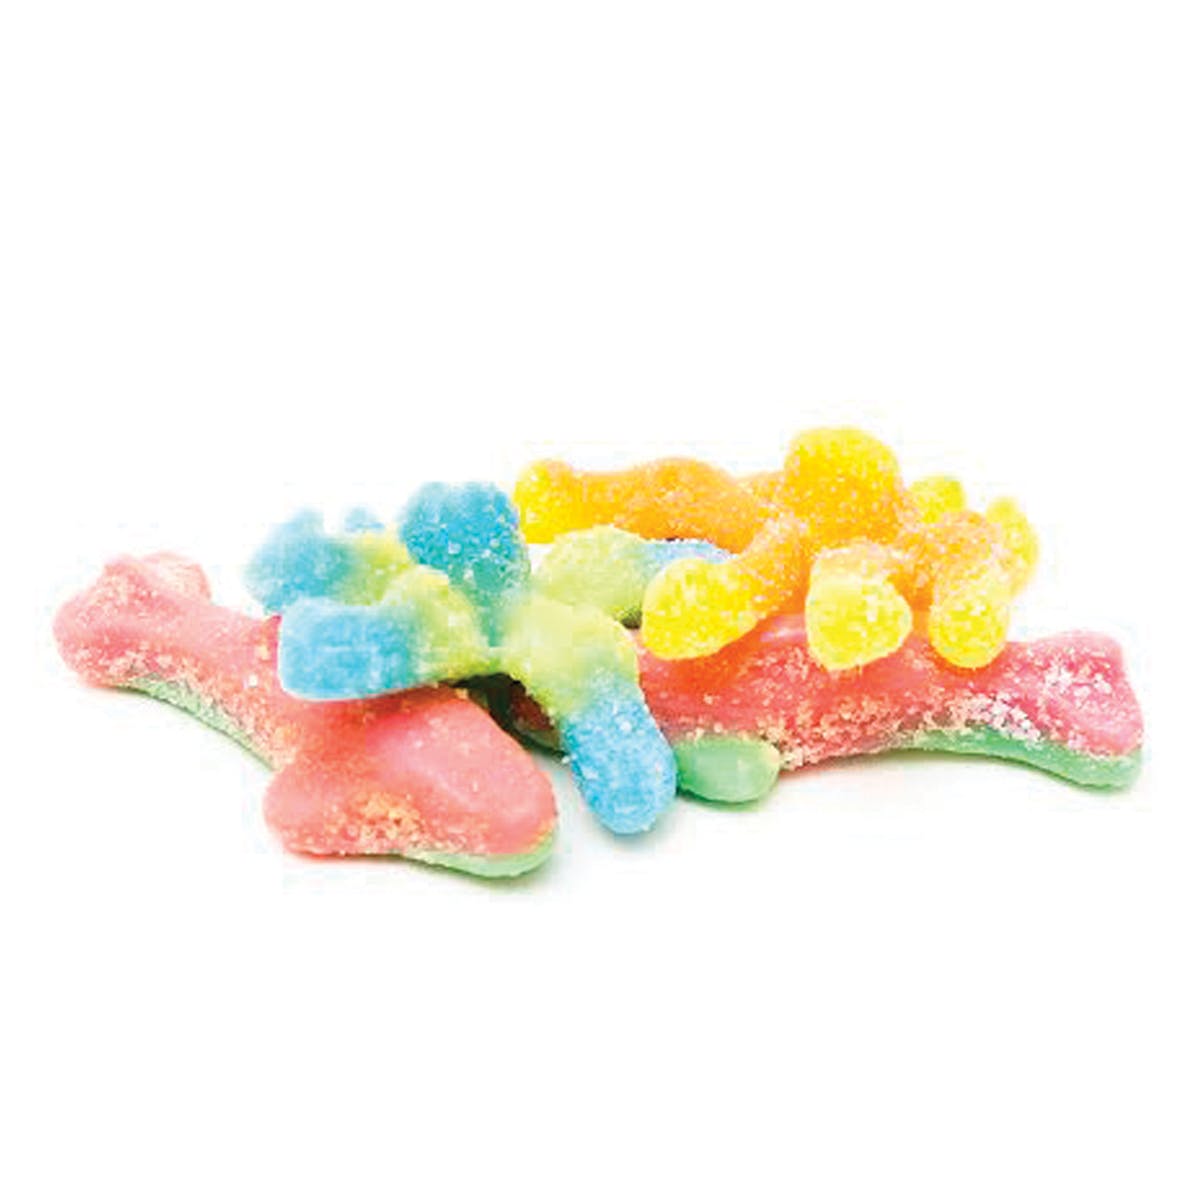 Sour Sea Creatures 100mg